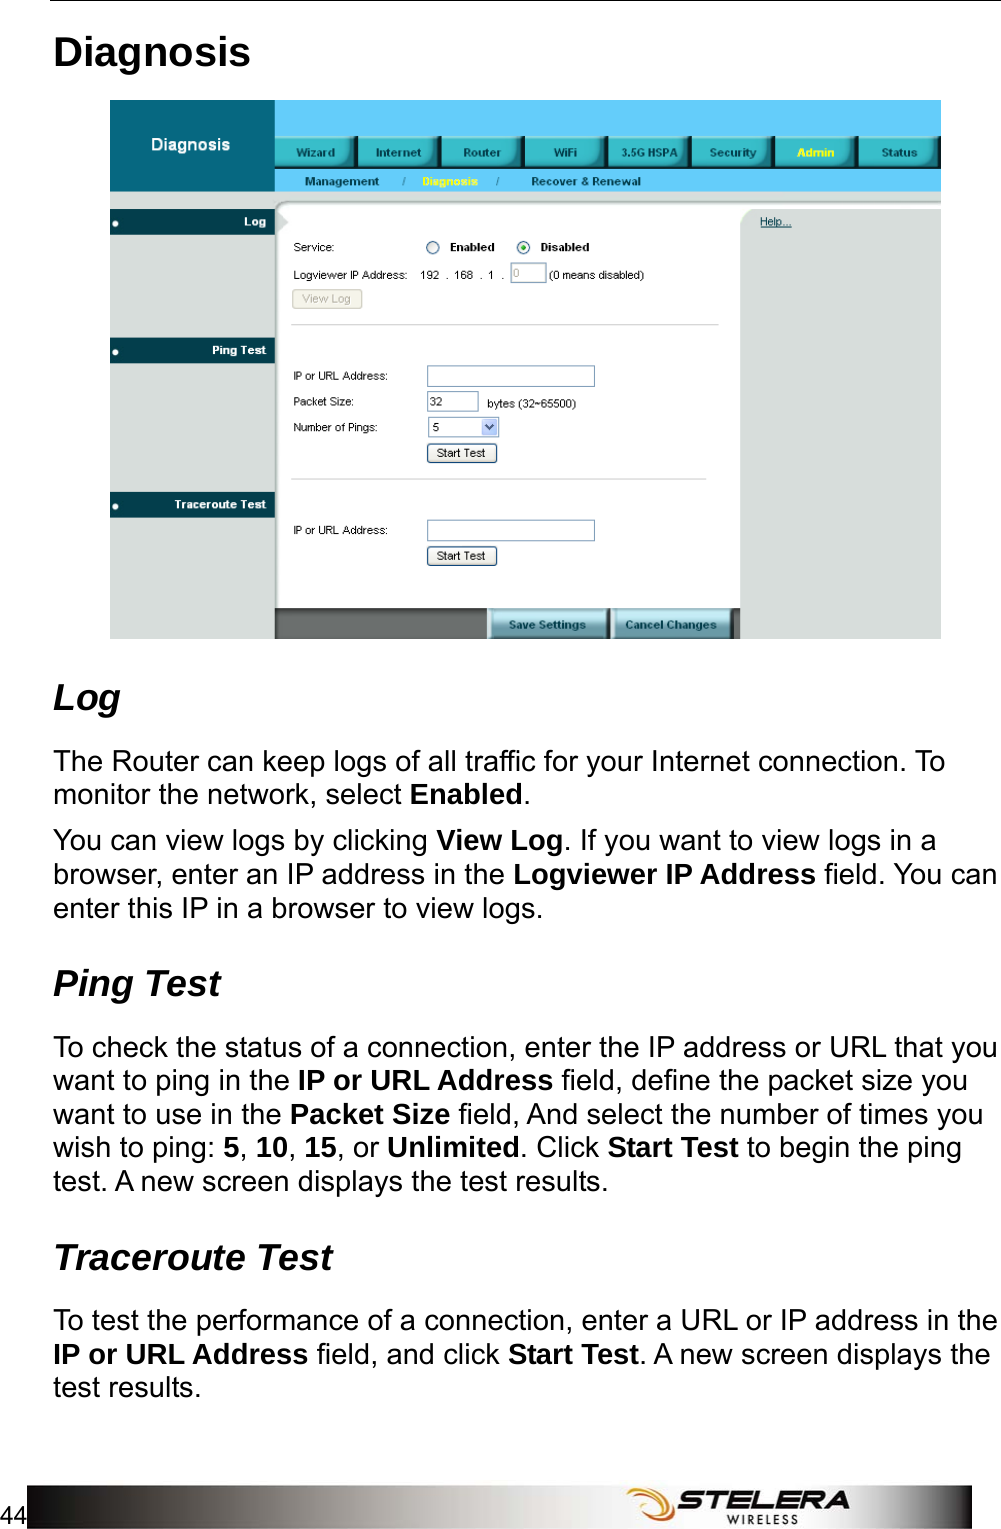 Admin Setup 44   Diagnosis  Log The Router can keep logs of all traffic for your Internet connection. To monitor the network, select Enabled. You can view logs by clicking View Log. If you want to view logs in a browser, enter an IP address in the Logviewer IP Address field. You can enter this IP in a browser to view logs.   Ping Test To check the status of a connection, enter the IP address or URL that you want to ping in the IP or URL Address field, define the packet size you want to use in the Packet Size field, And select the number of times you wish to ping: 5, 10, 15, or Unlimited. Click Start Test to begin the ping test. A new screen displays the test results. Traceroute Test To test the performance of a connection, enter a URL or IP address in the IP or URL Address field, and click Start Test. A new screen displays the test results. 